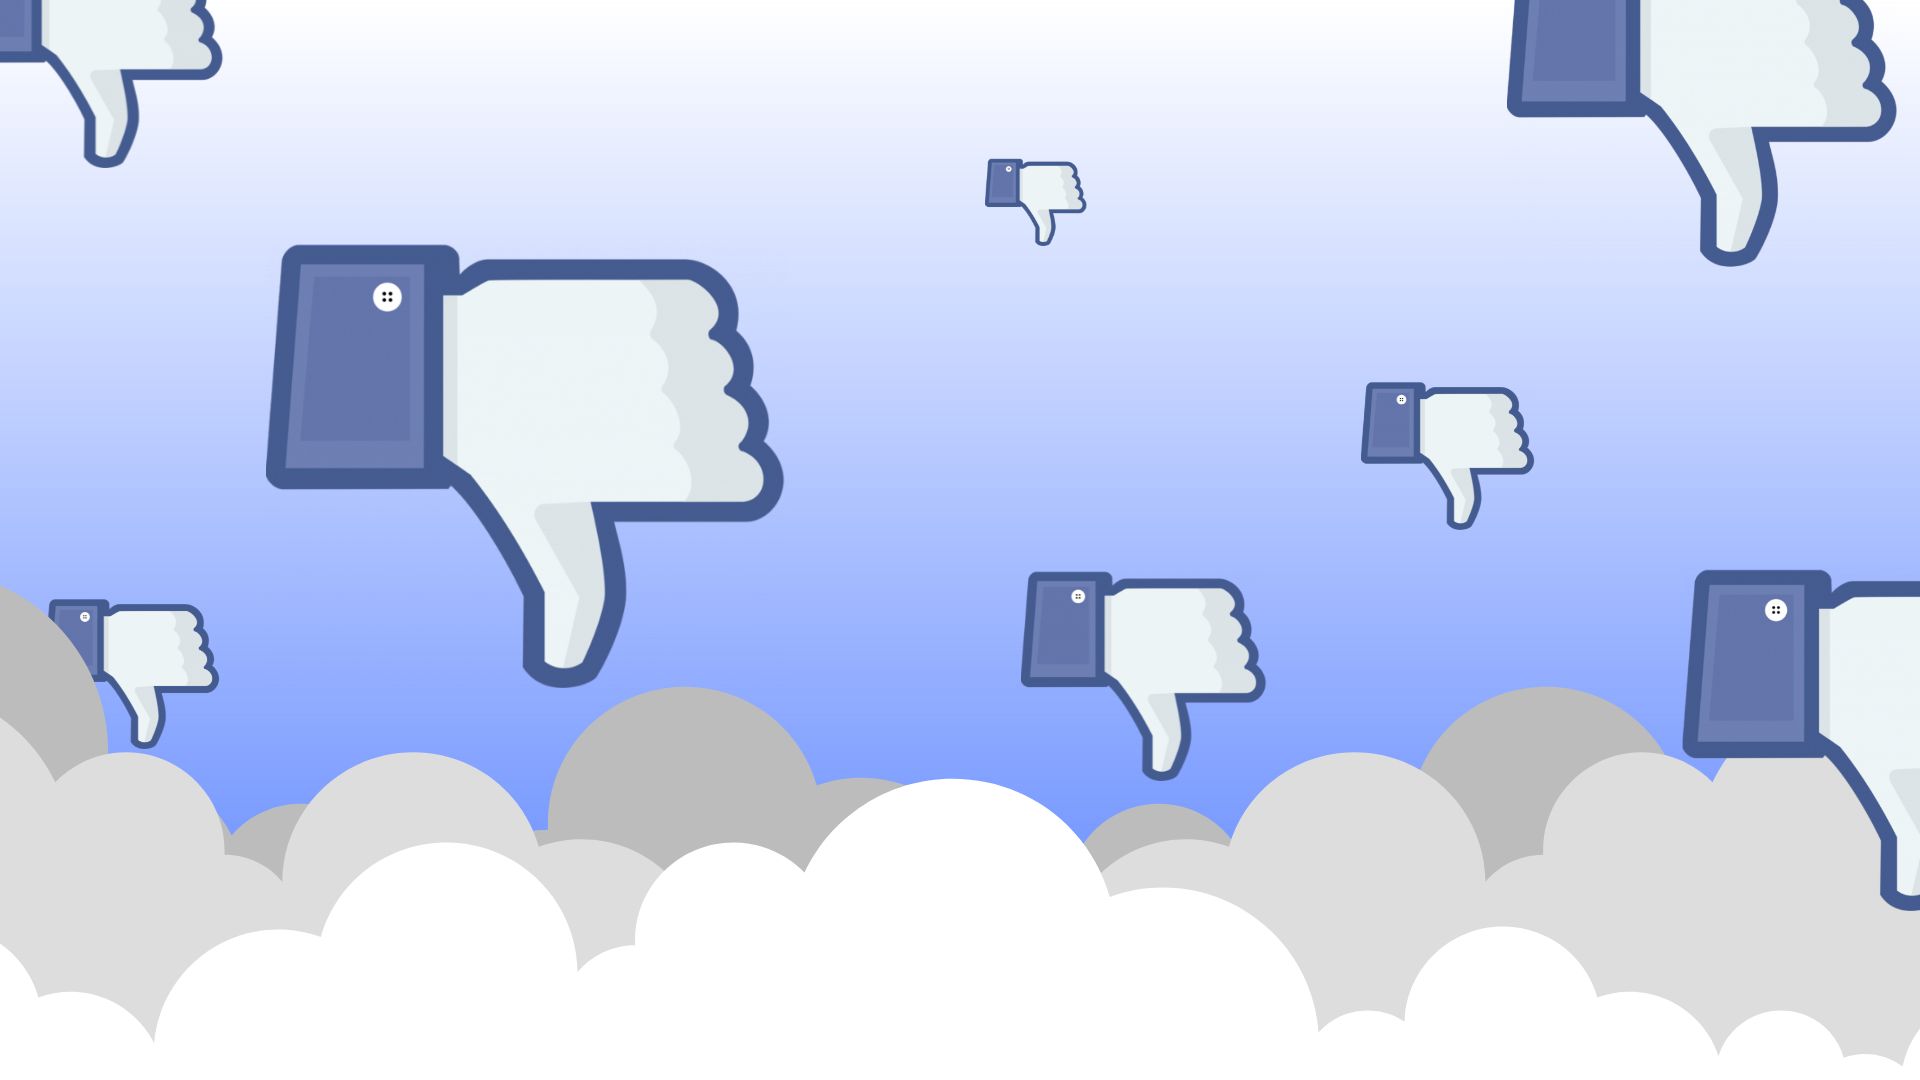 Minimalistic vector illustration: a flock of Facebook thumbs-down dislike icons flies across a blue sky with fluffy clouds in the foreground.